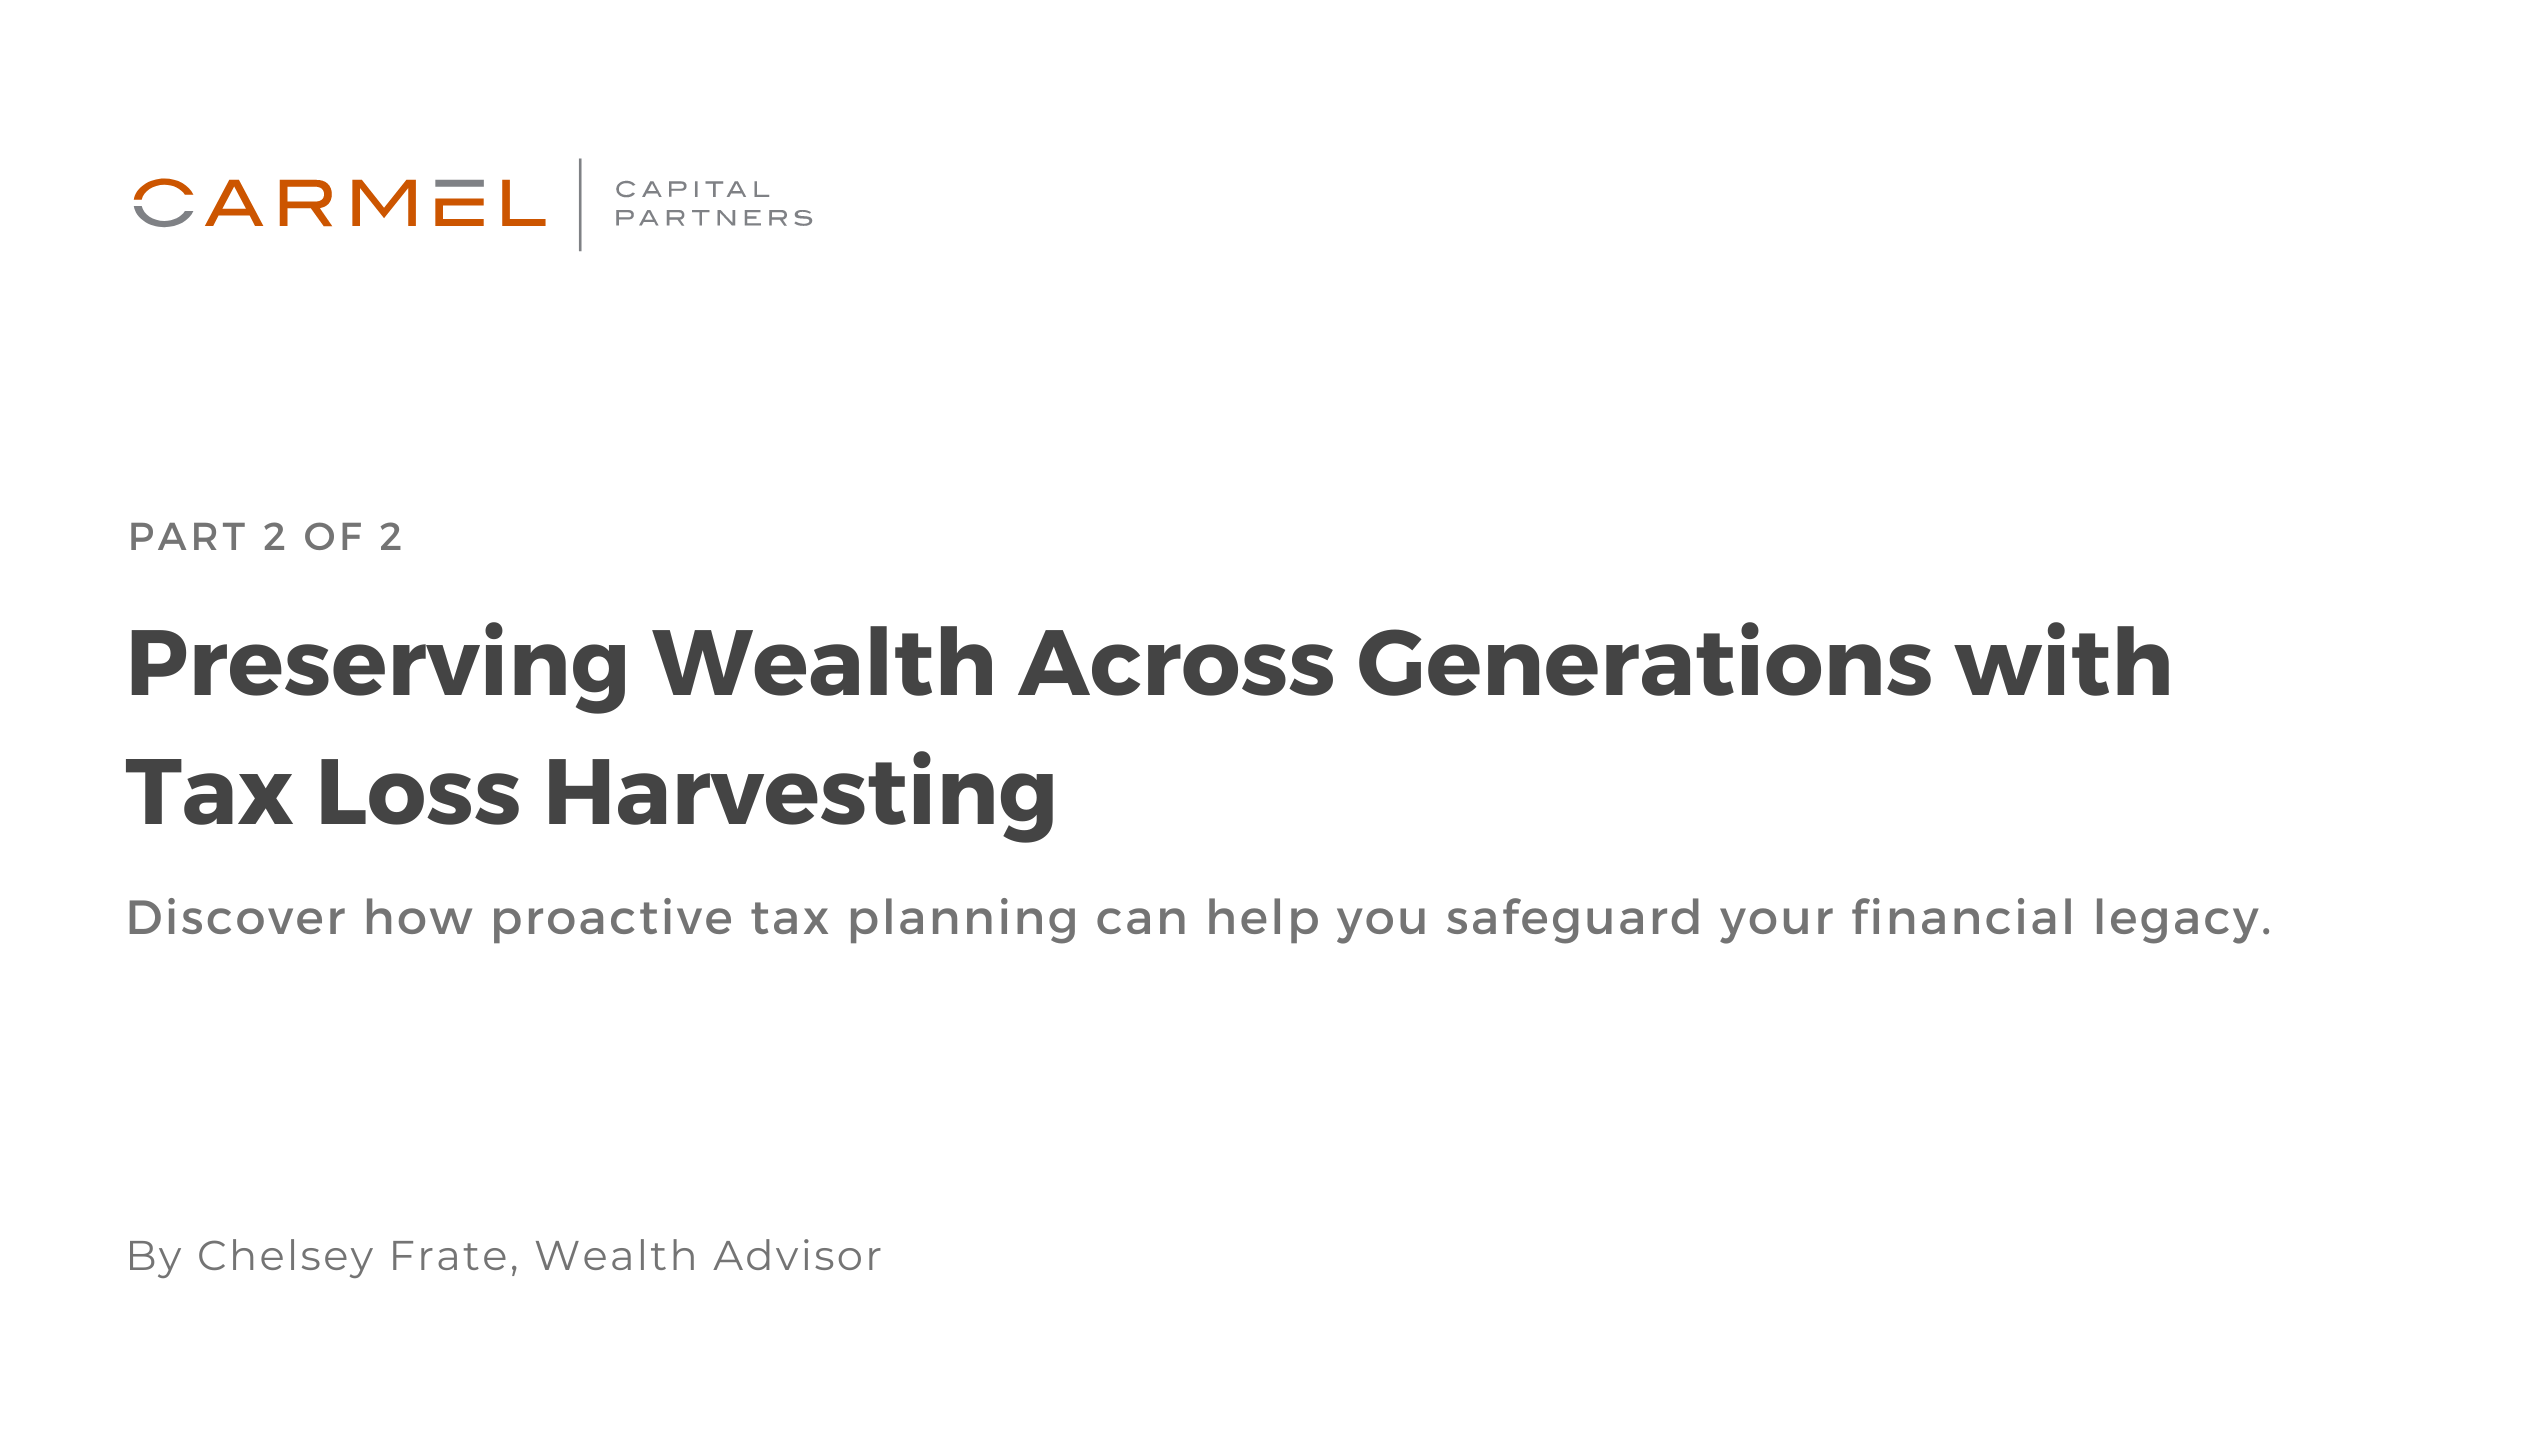 Preserving Wealth Across Generations with Tax Loss Harvesting